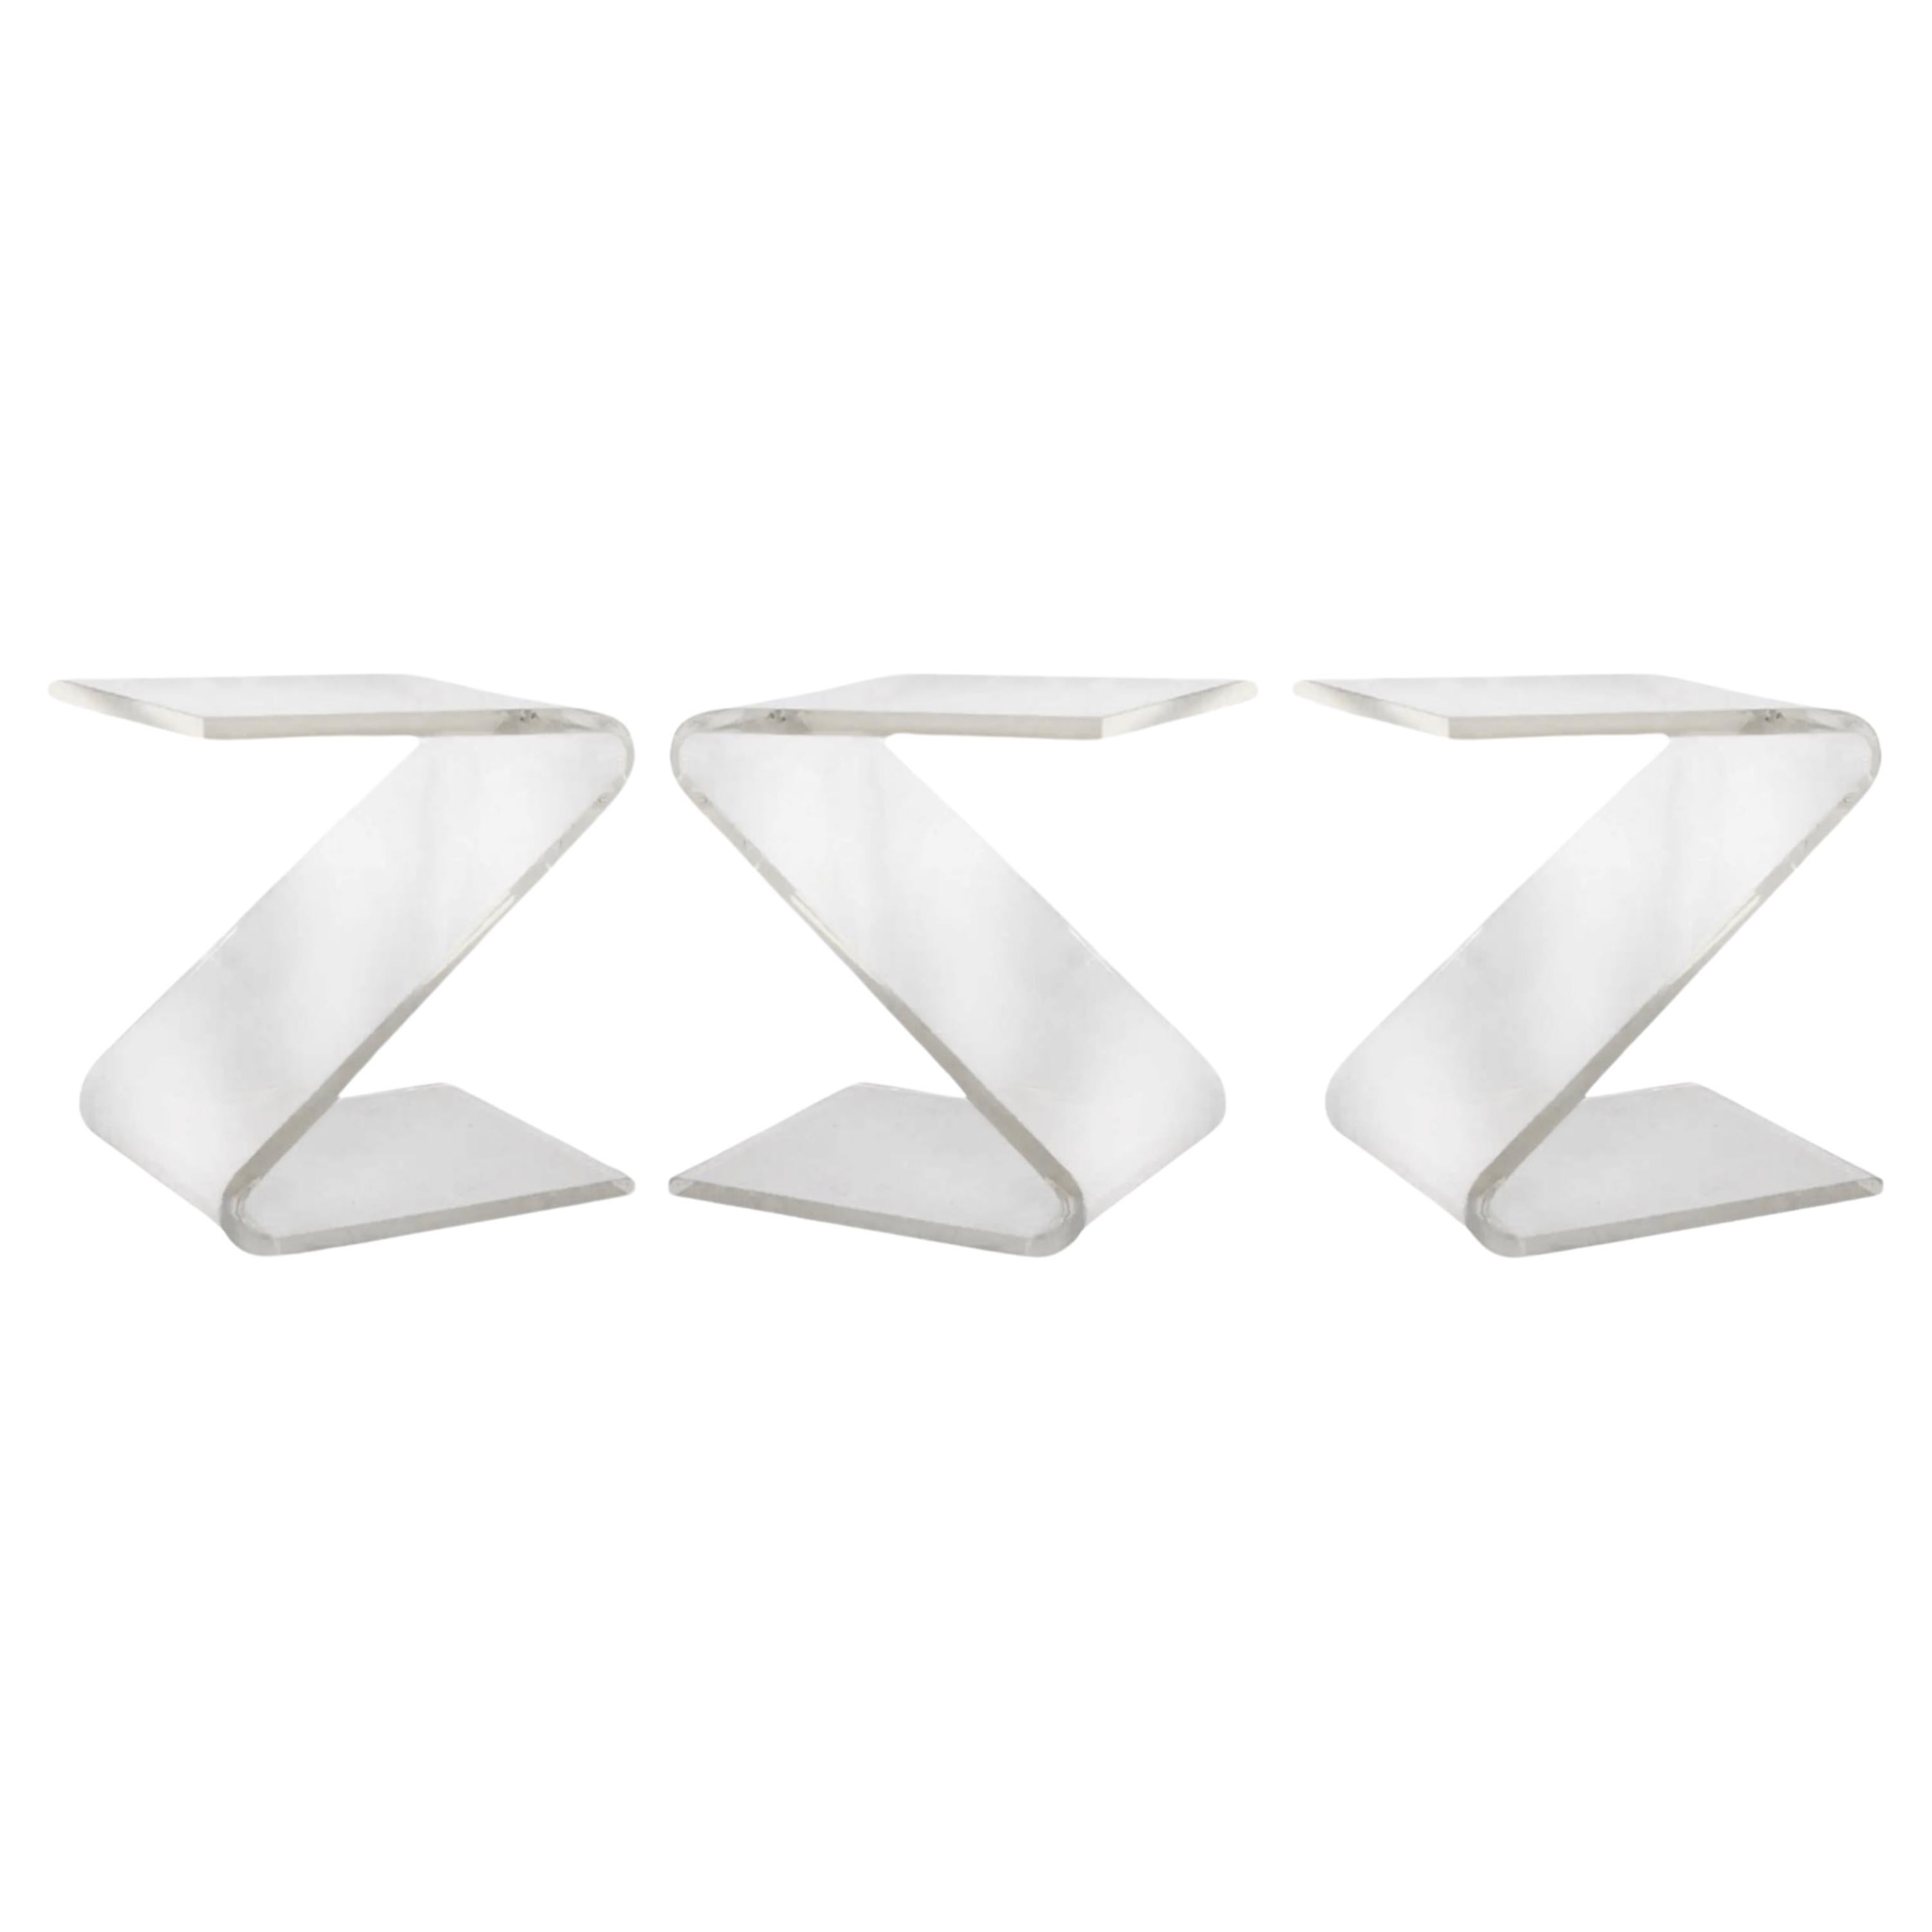 John Mascheroni Lucite Z-Form Side Tables (3 available)